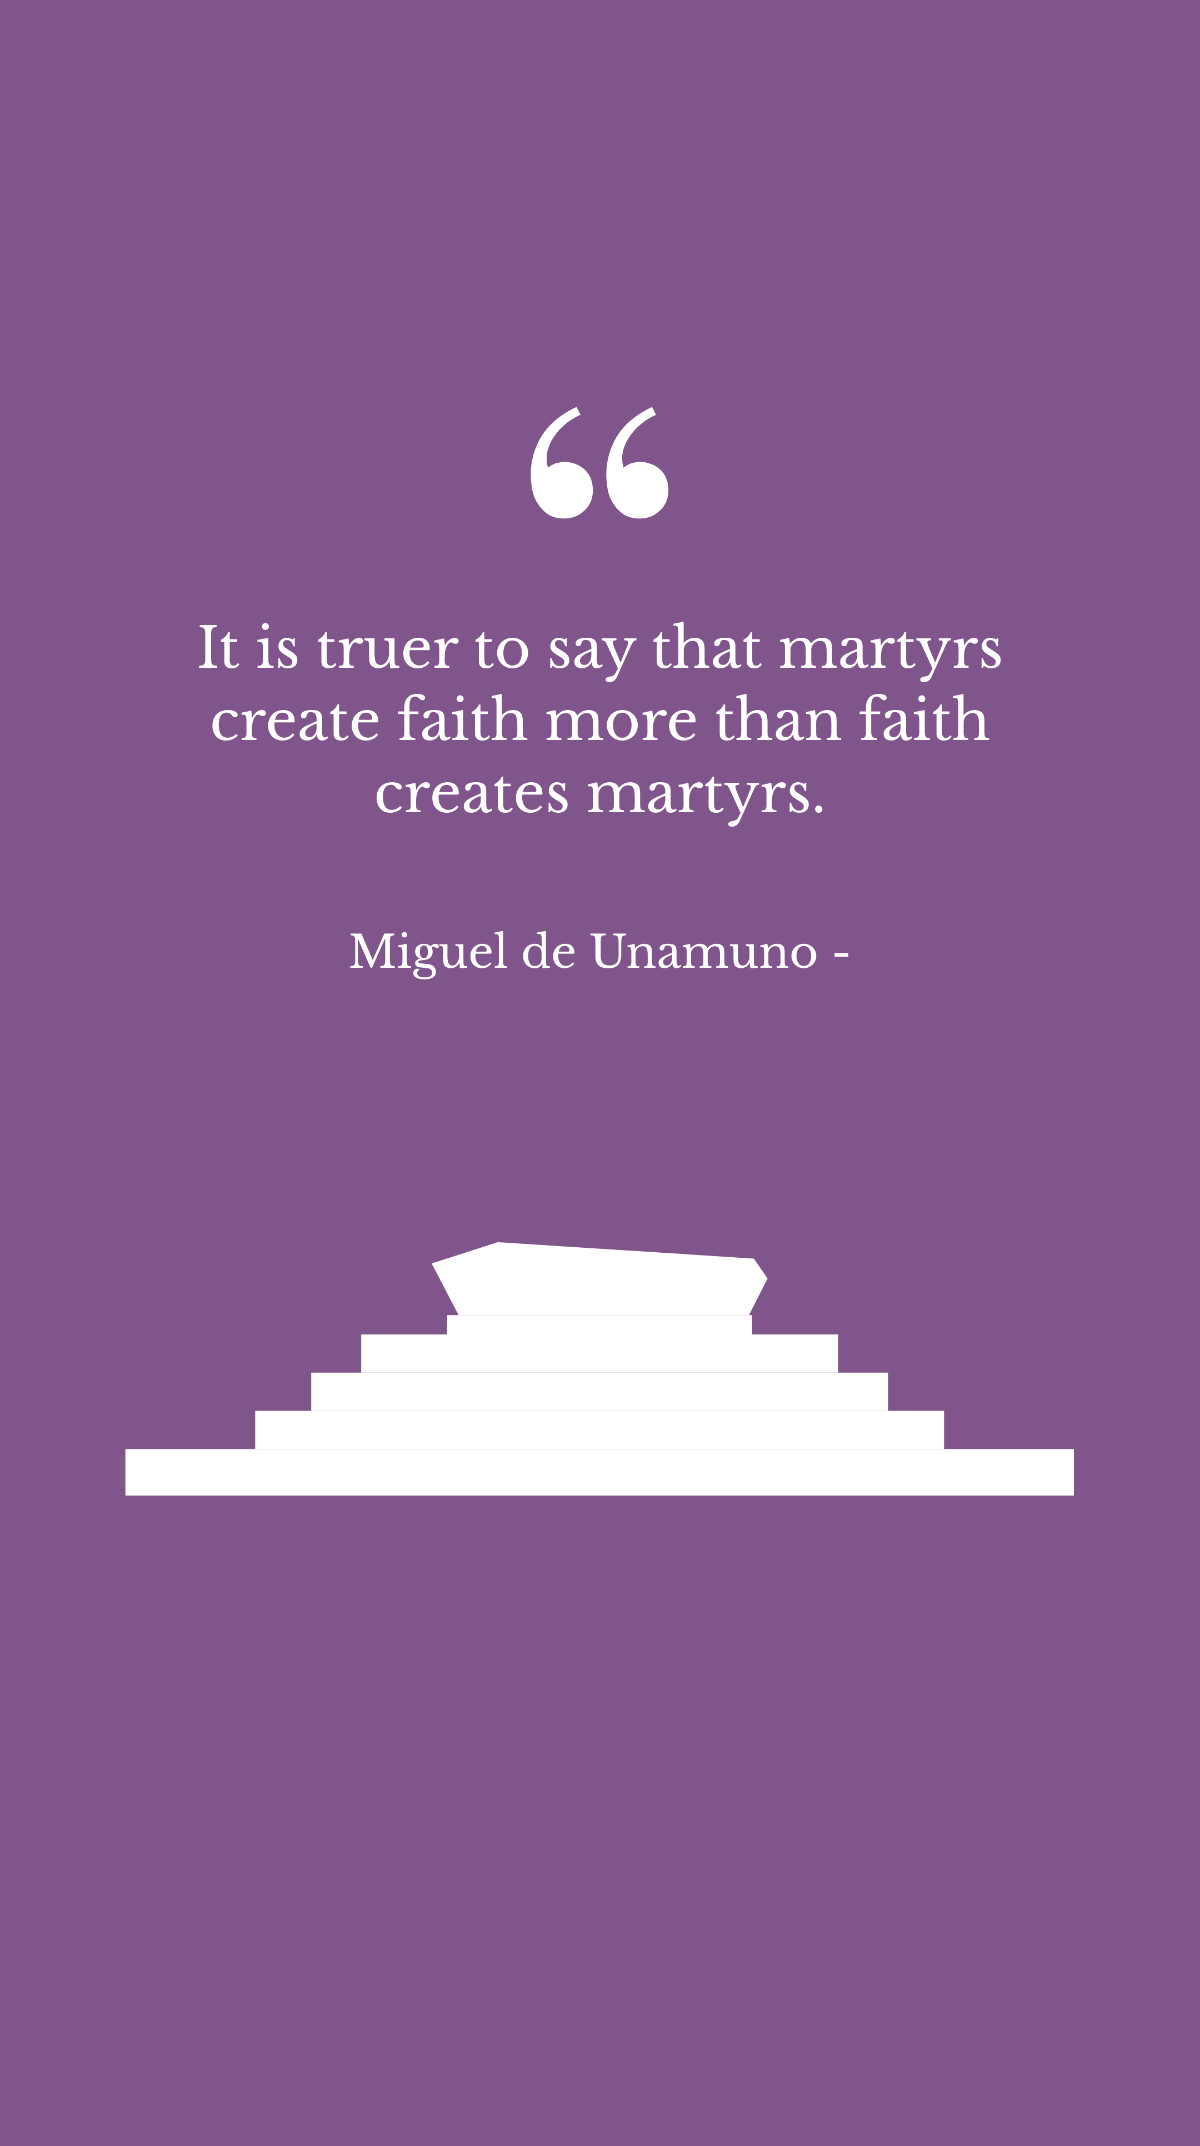 Free Miguel de Unamuno - It is truer to say that martyrs create faith more than faith creates martyrs. Template